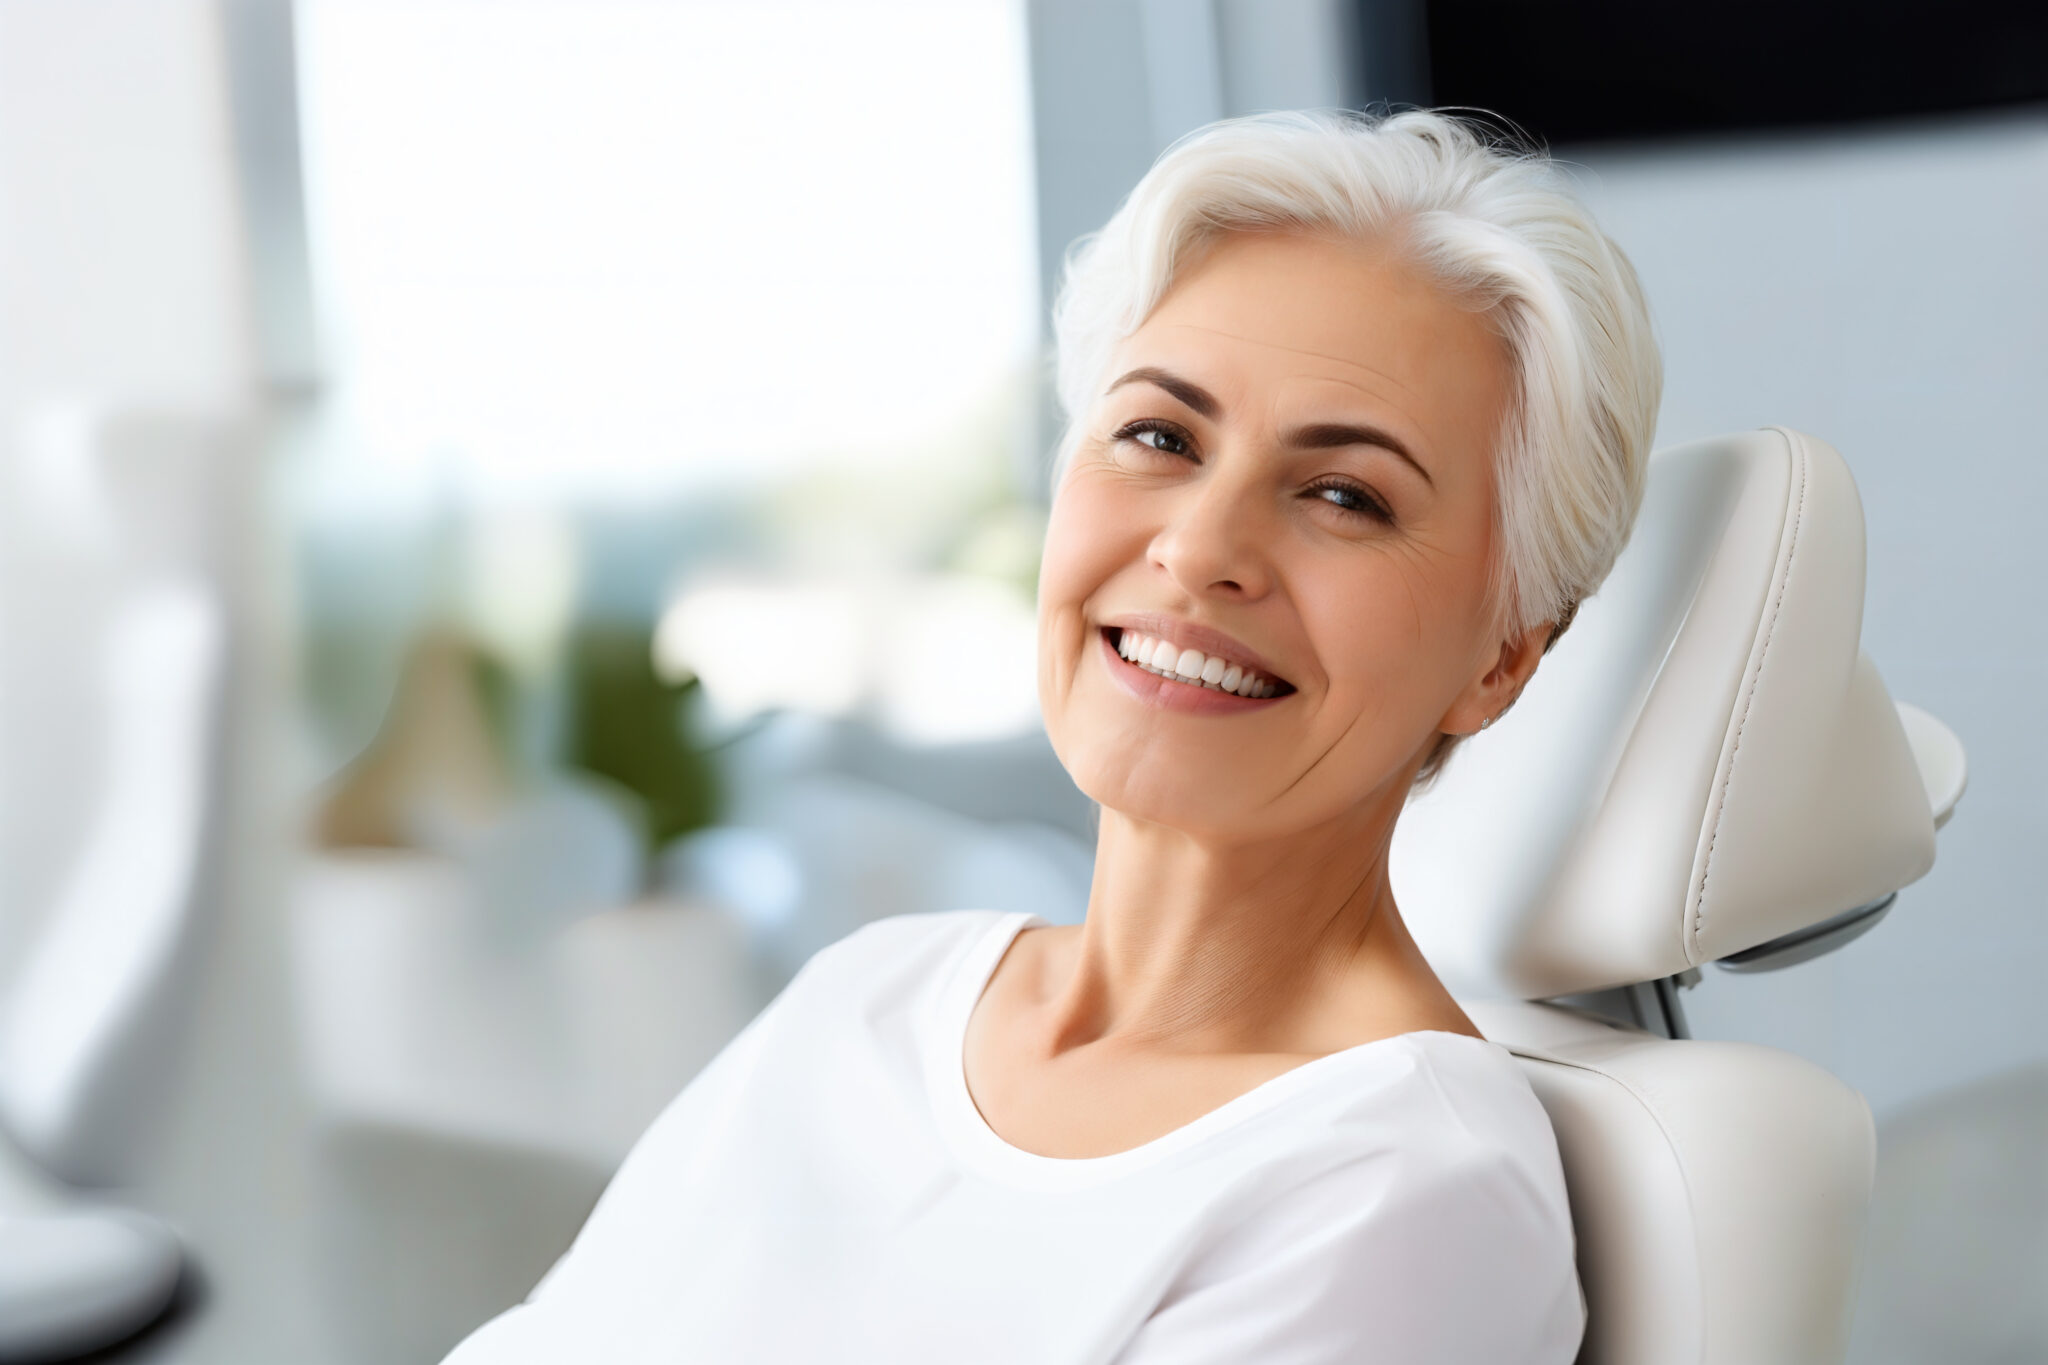 Dentures and Dental Care | Absolute Dental Care